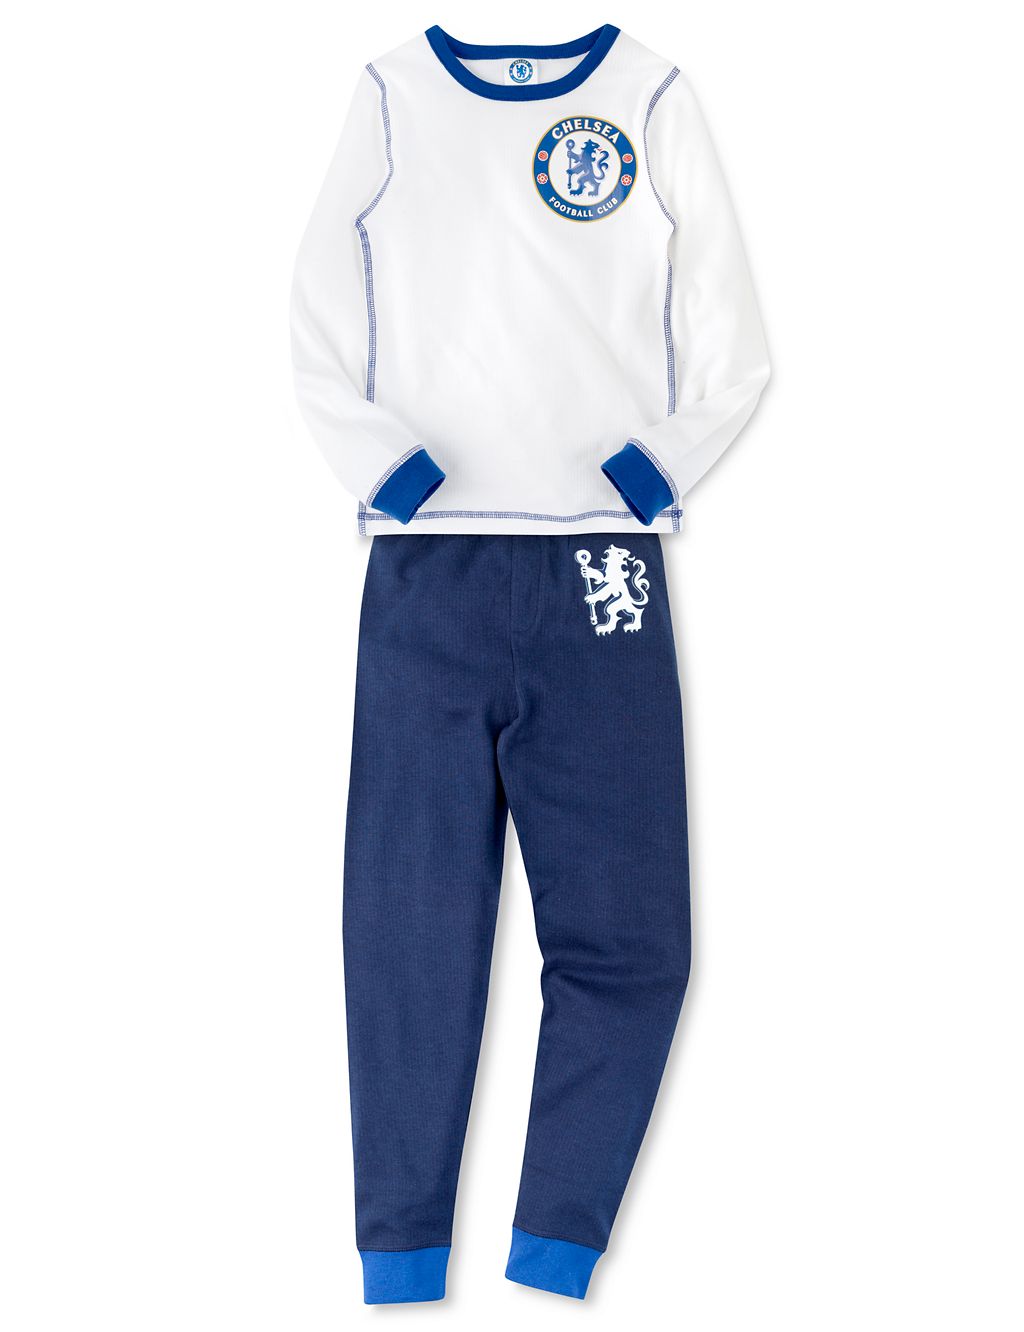 Chelsea Football Club Thermal Top & Trousers Set 3 of 3